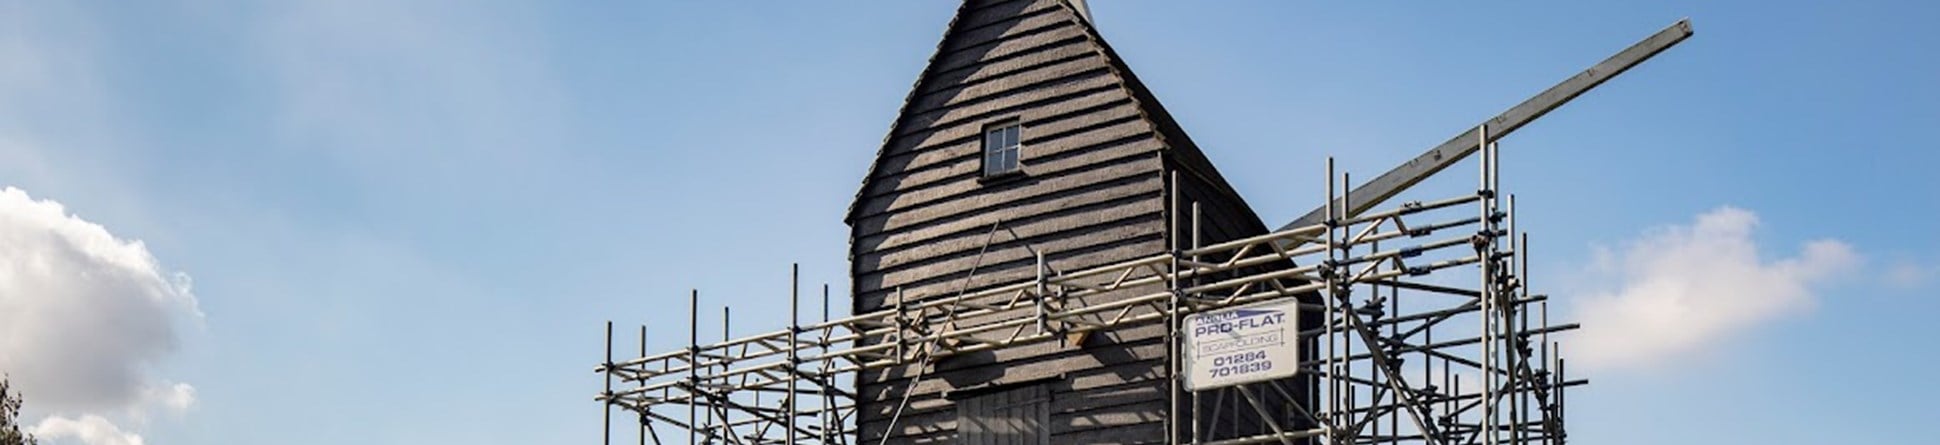 Bourn Windmill surrounded by scaffolding propping it  up. Steps are shown leading to a doorway. The post which turns the mill can be seen in the foreground. There's a small window towards the top of the mill and two sail posts can be seen on the other side of the building.